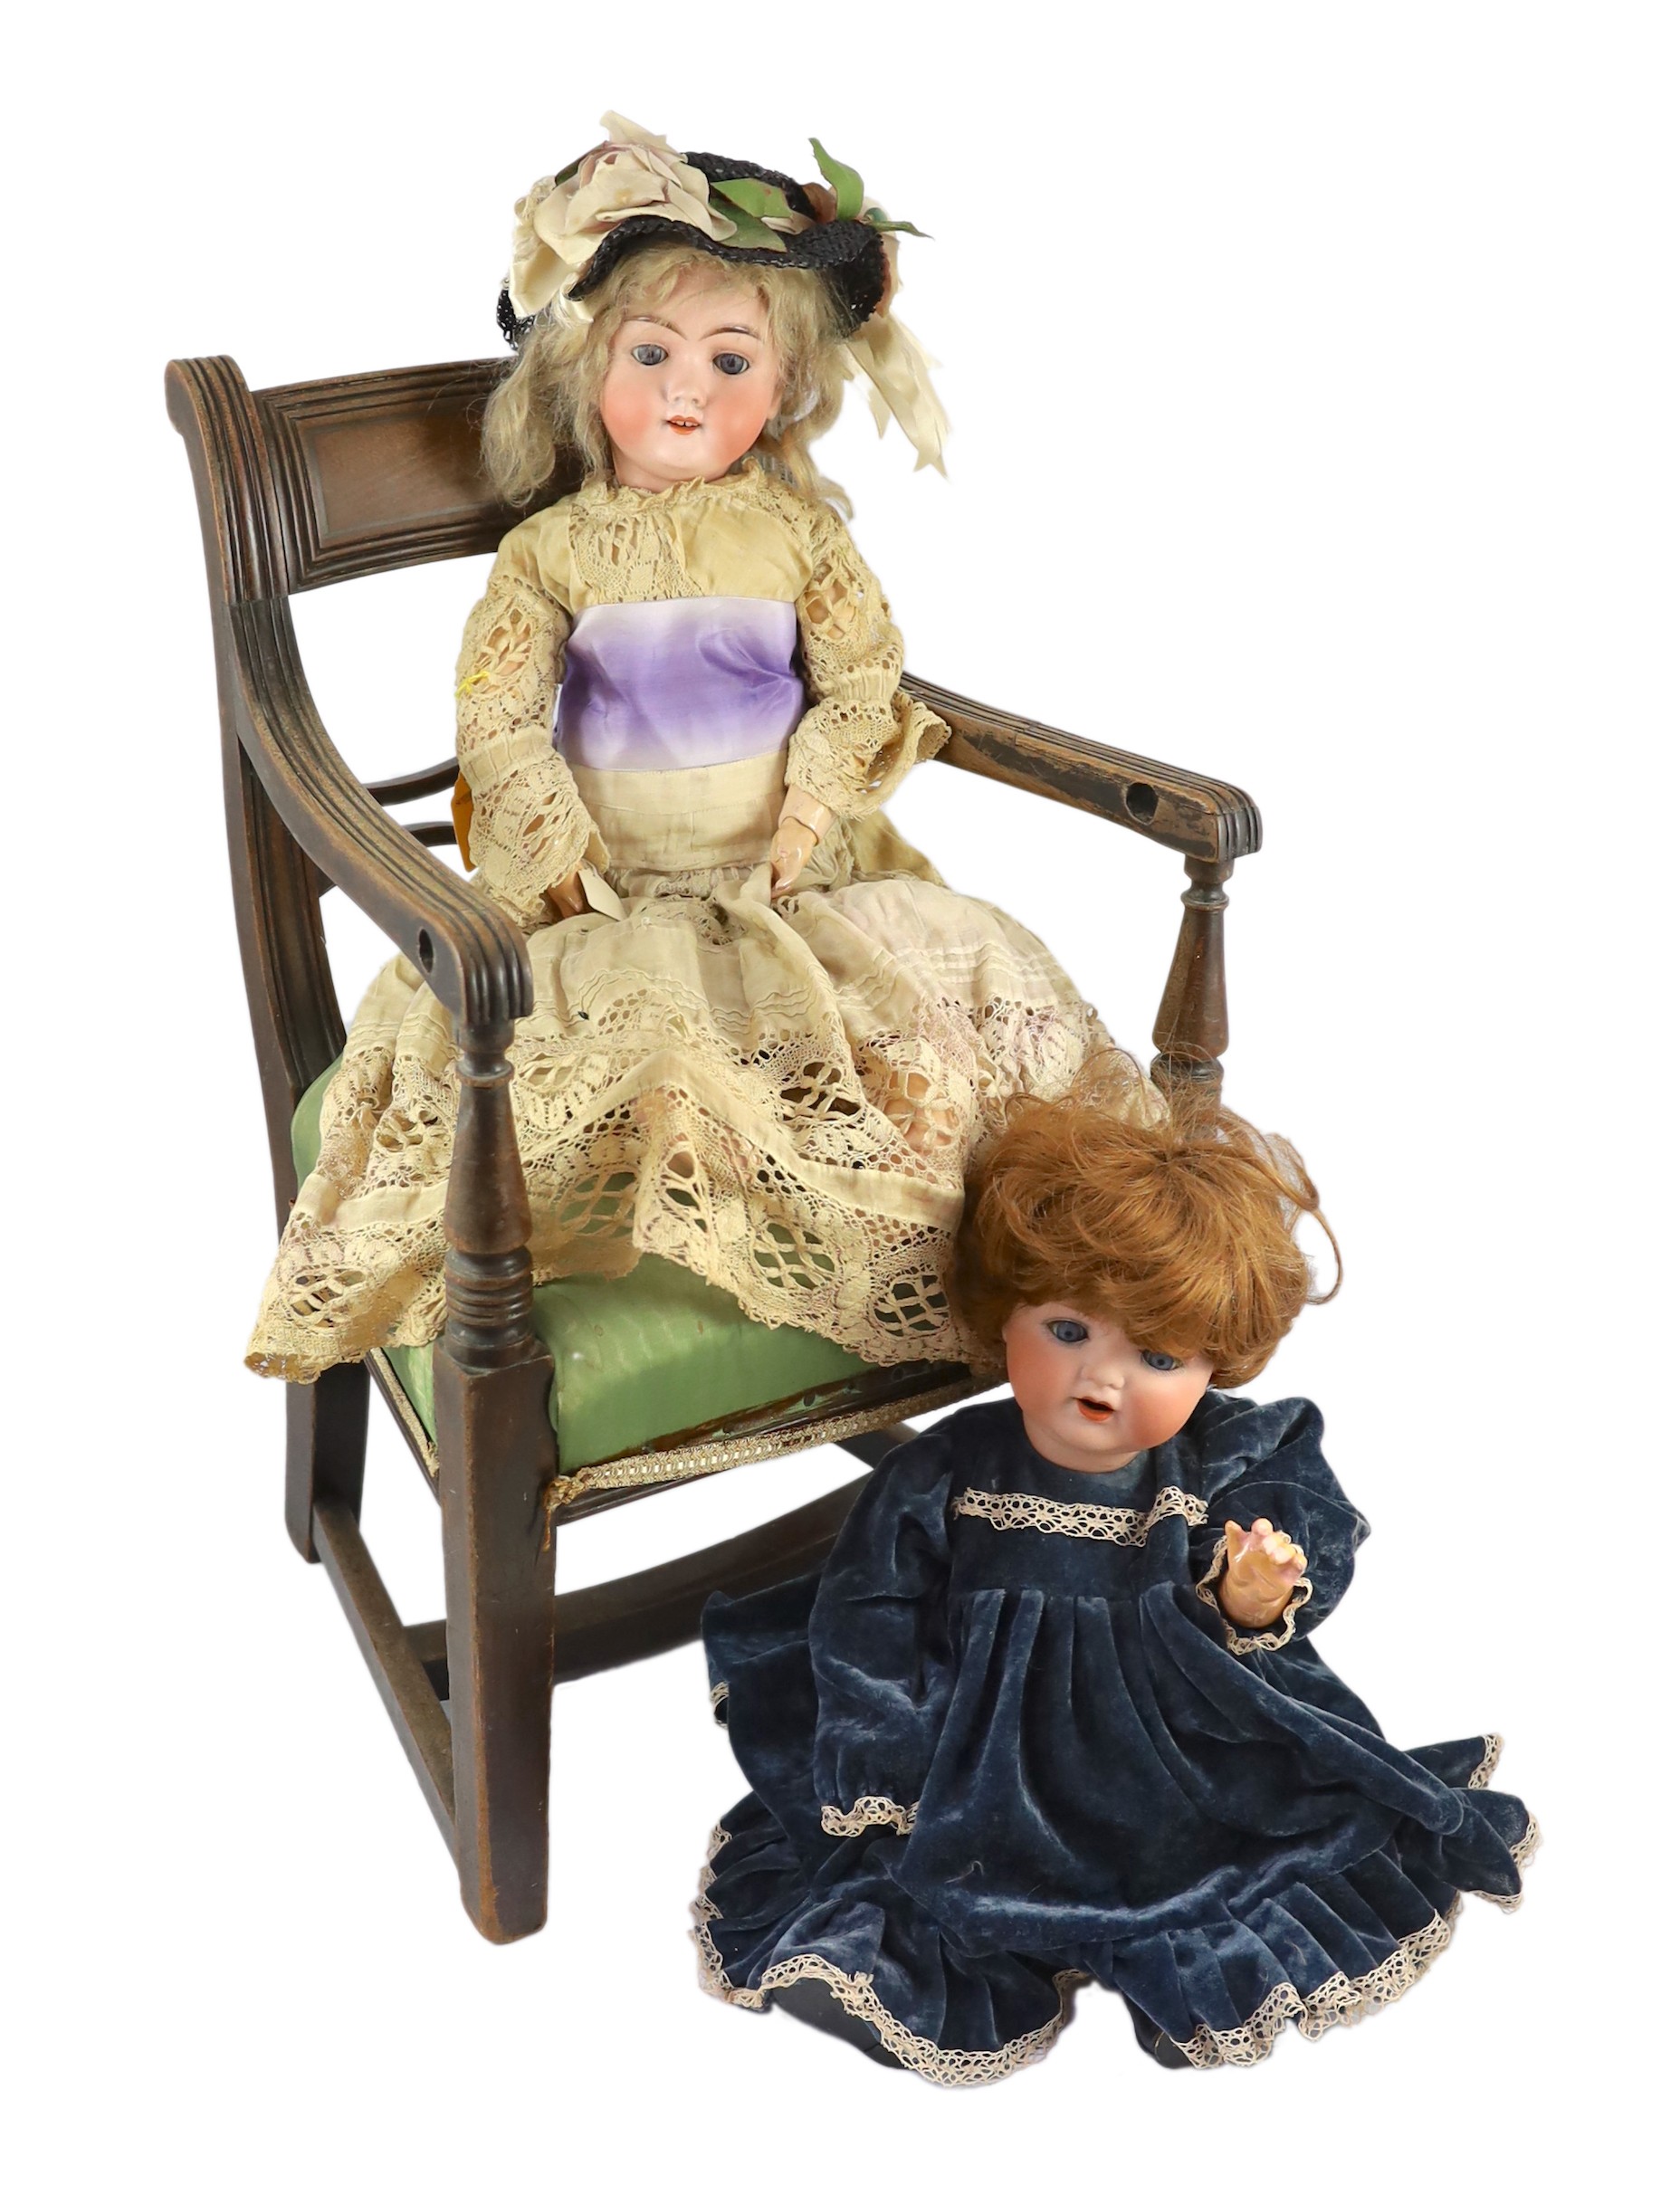 An Armand Marseille bisque doll, German, circa 1935, 21in. (2) Please note the chair is for display purposes only.                                                                                                          